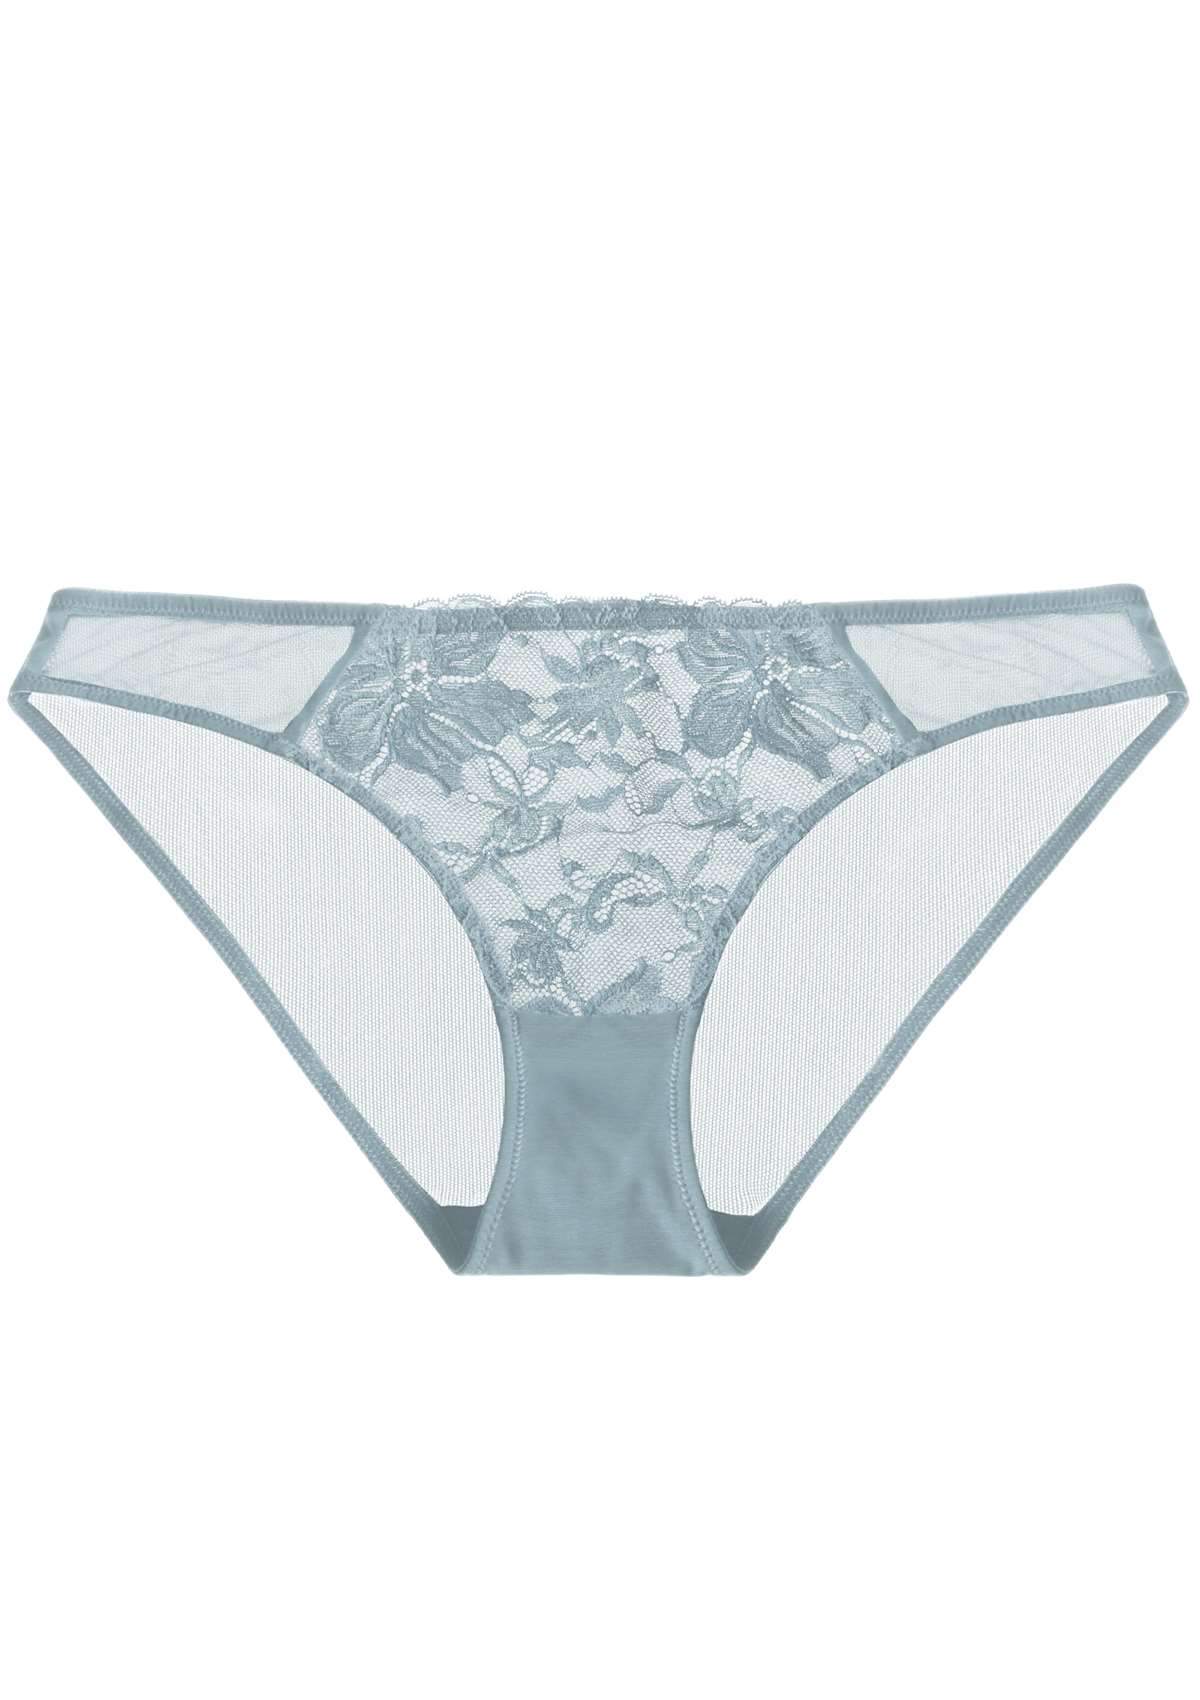 HSIA Pretty In Petals Mid-Rise Floral Lacy Mesh Lightweight Underwear  - XL / Pewter Blue